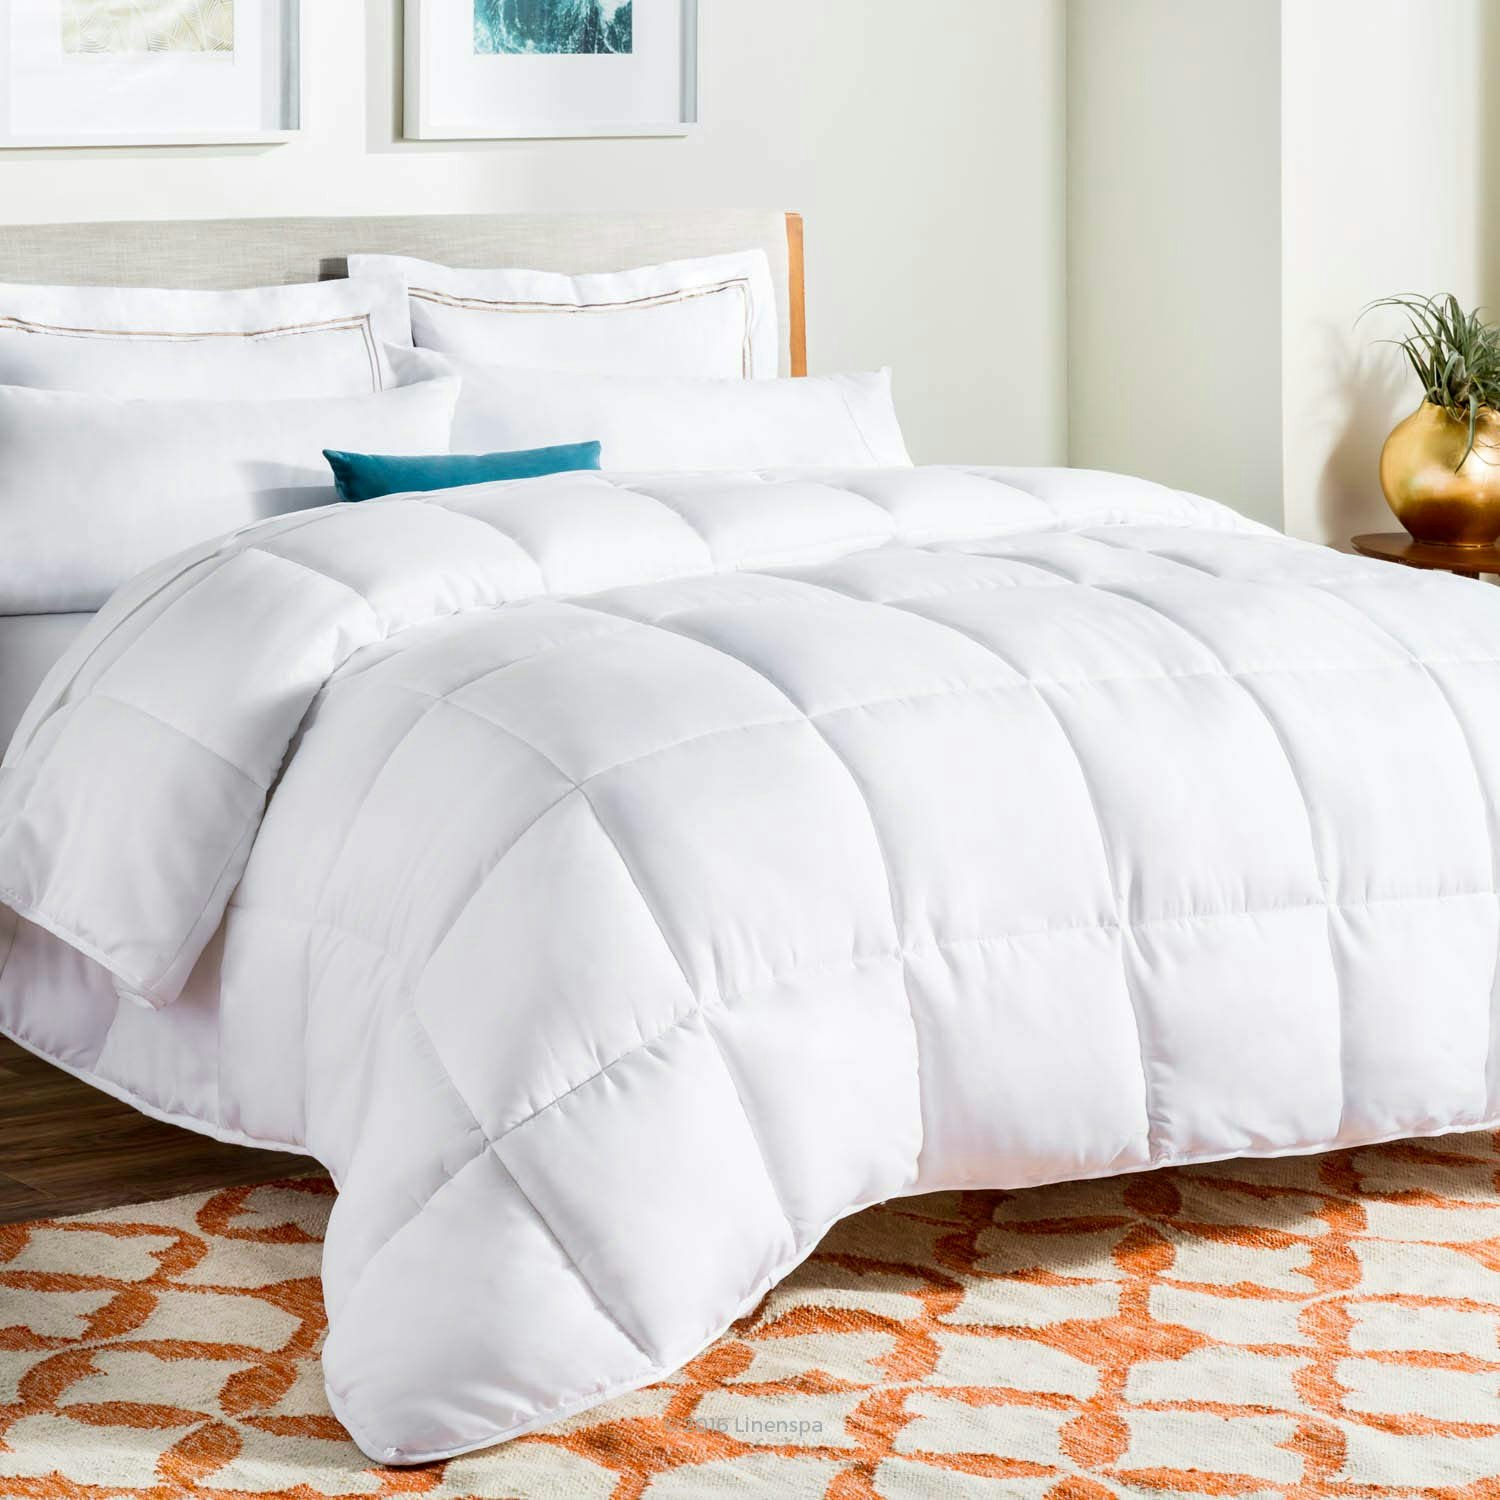 The 7 Best Comforters To Keep You Cool All Night